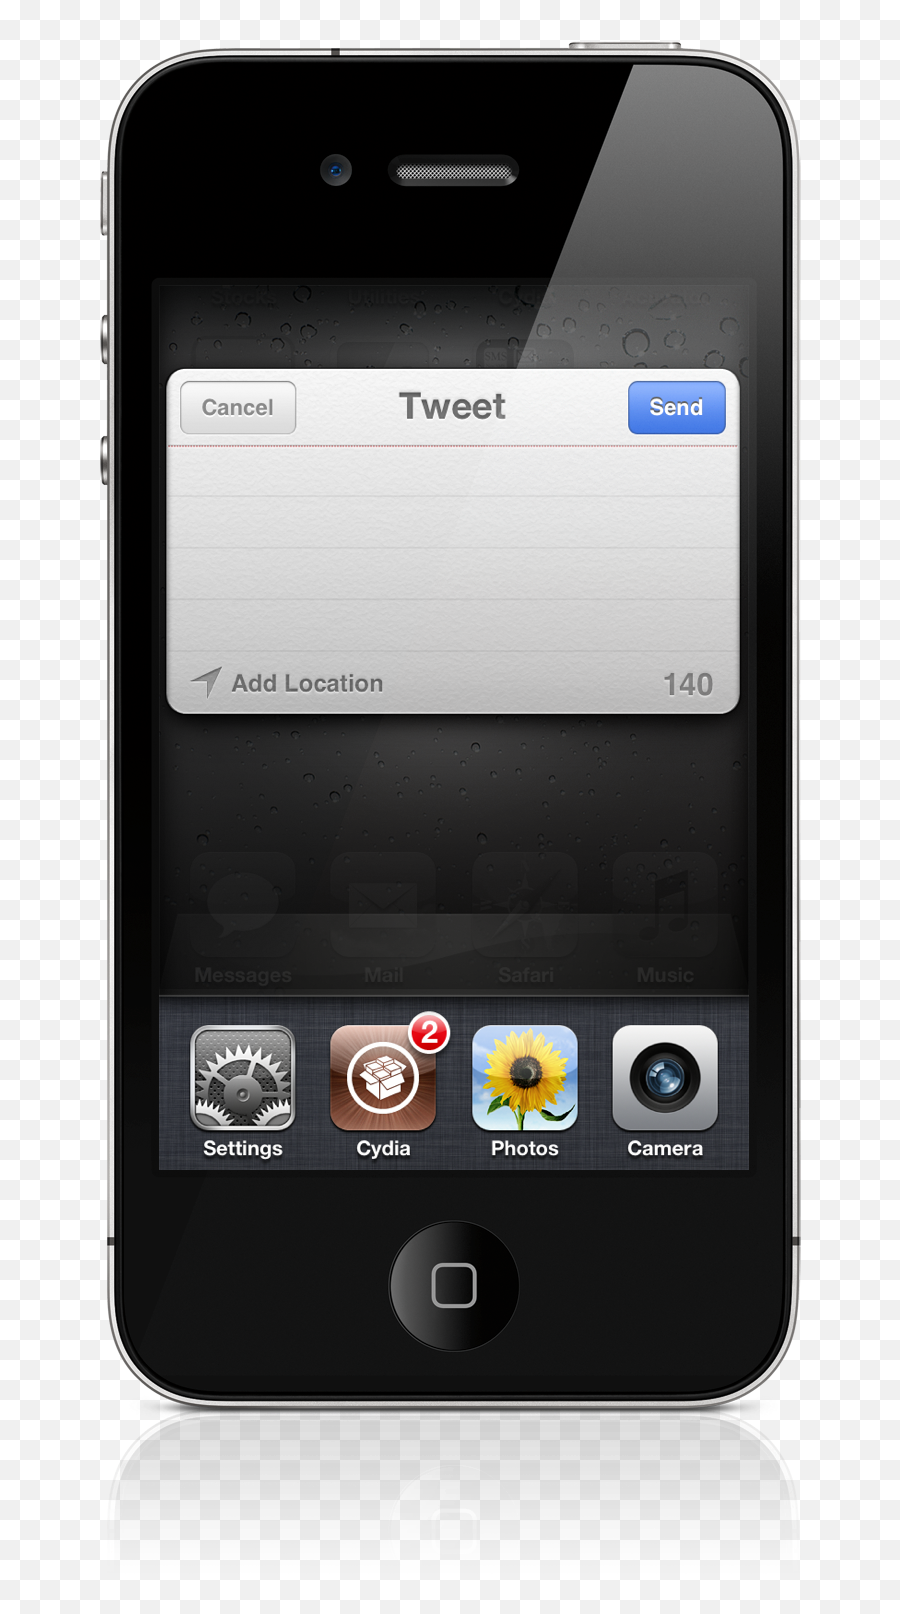 Twittertask Send Tweets From Anywhere In Ios 5 - Technology Applications Emoji,No Emoji On Iphone 5